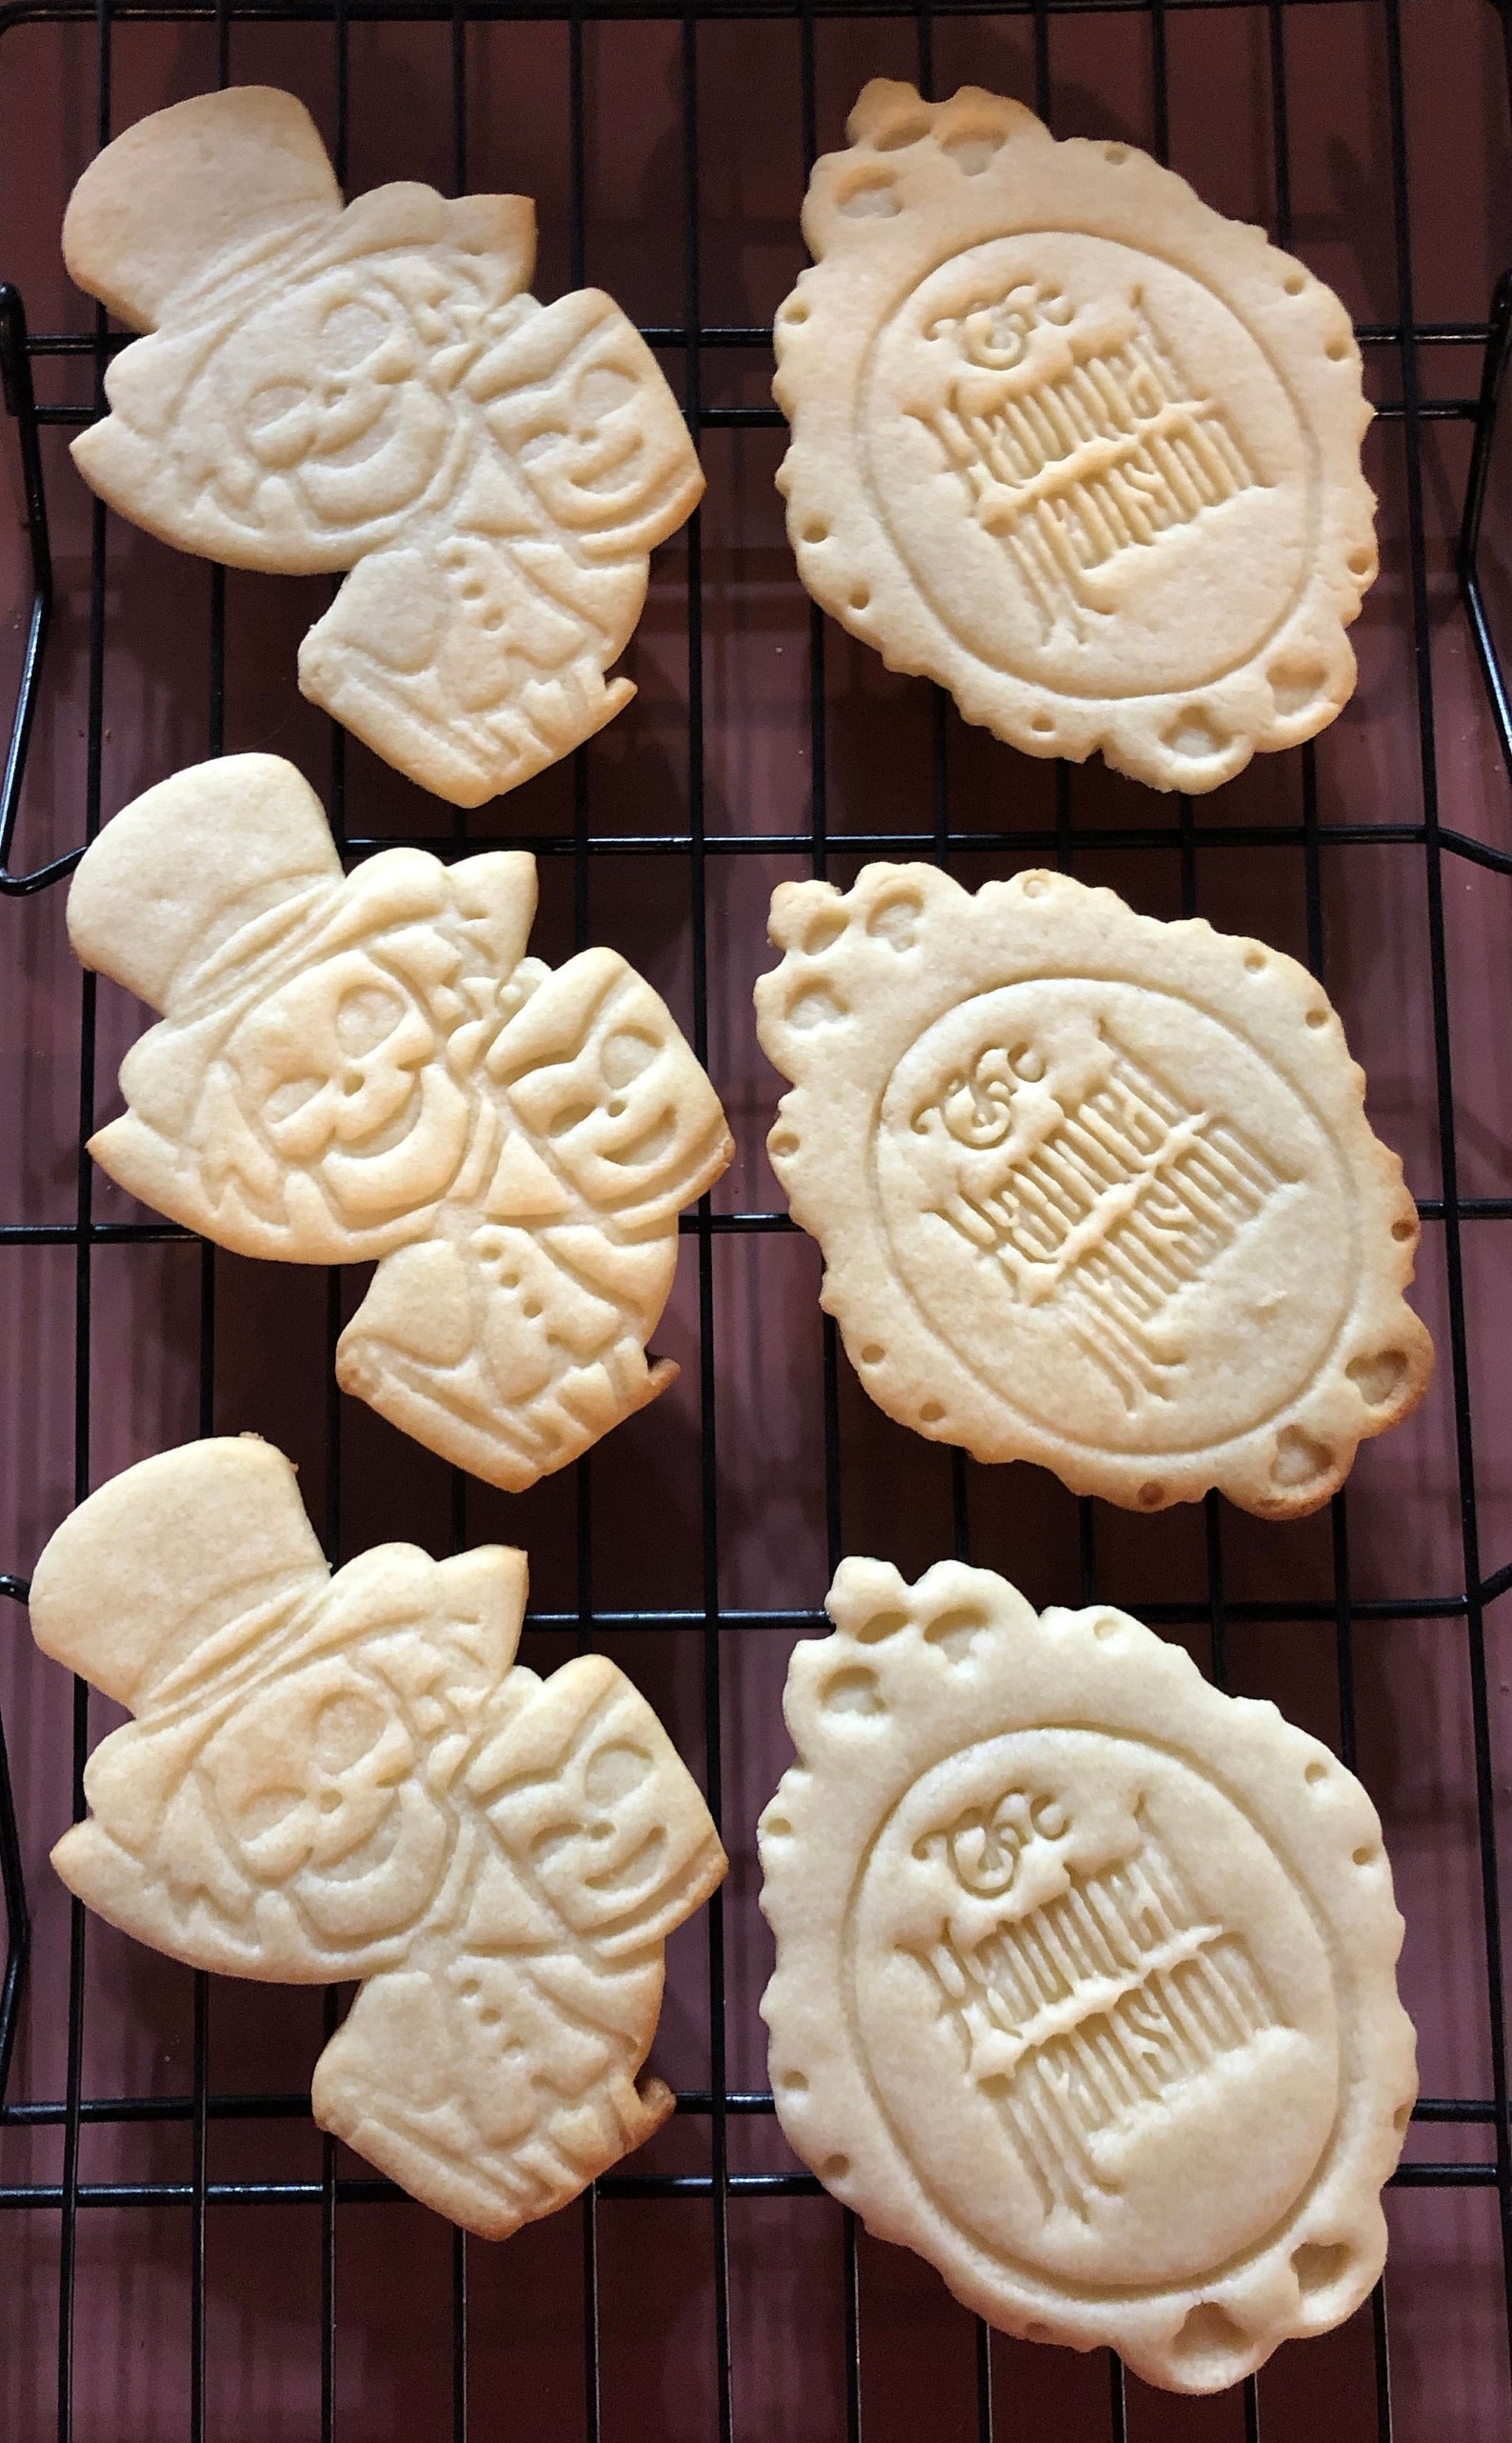 the haunted mansion cookies